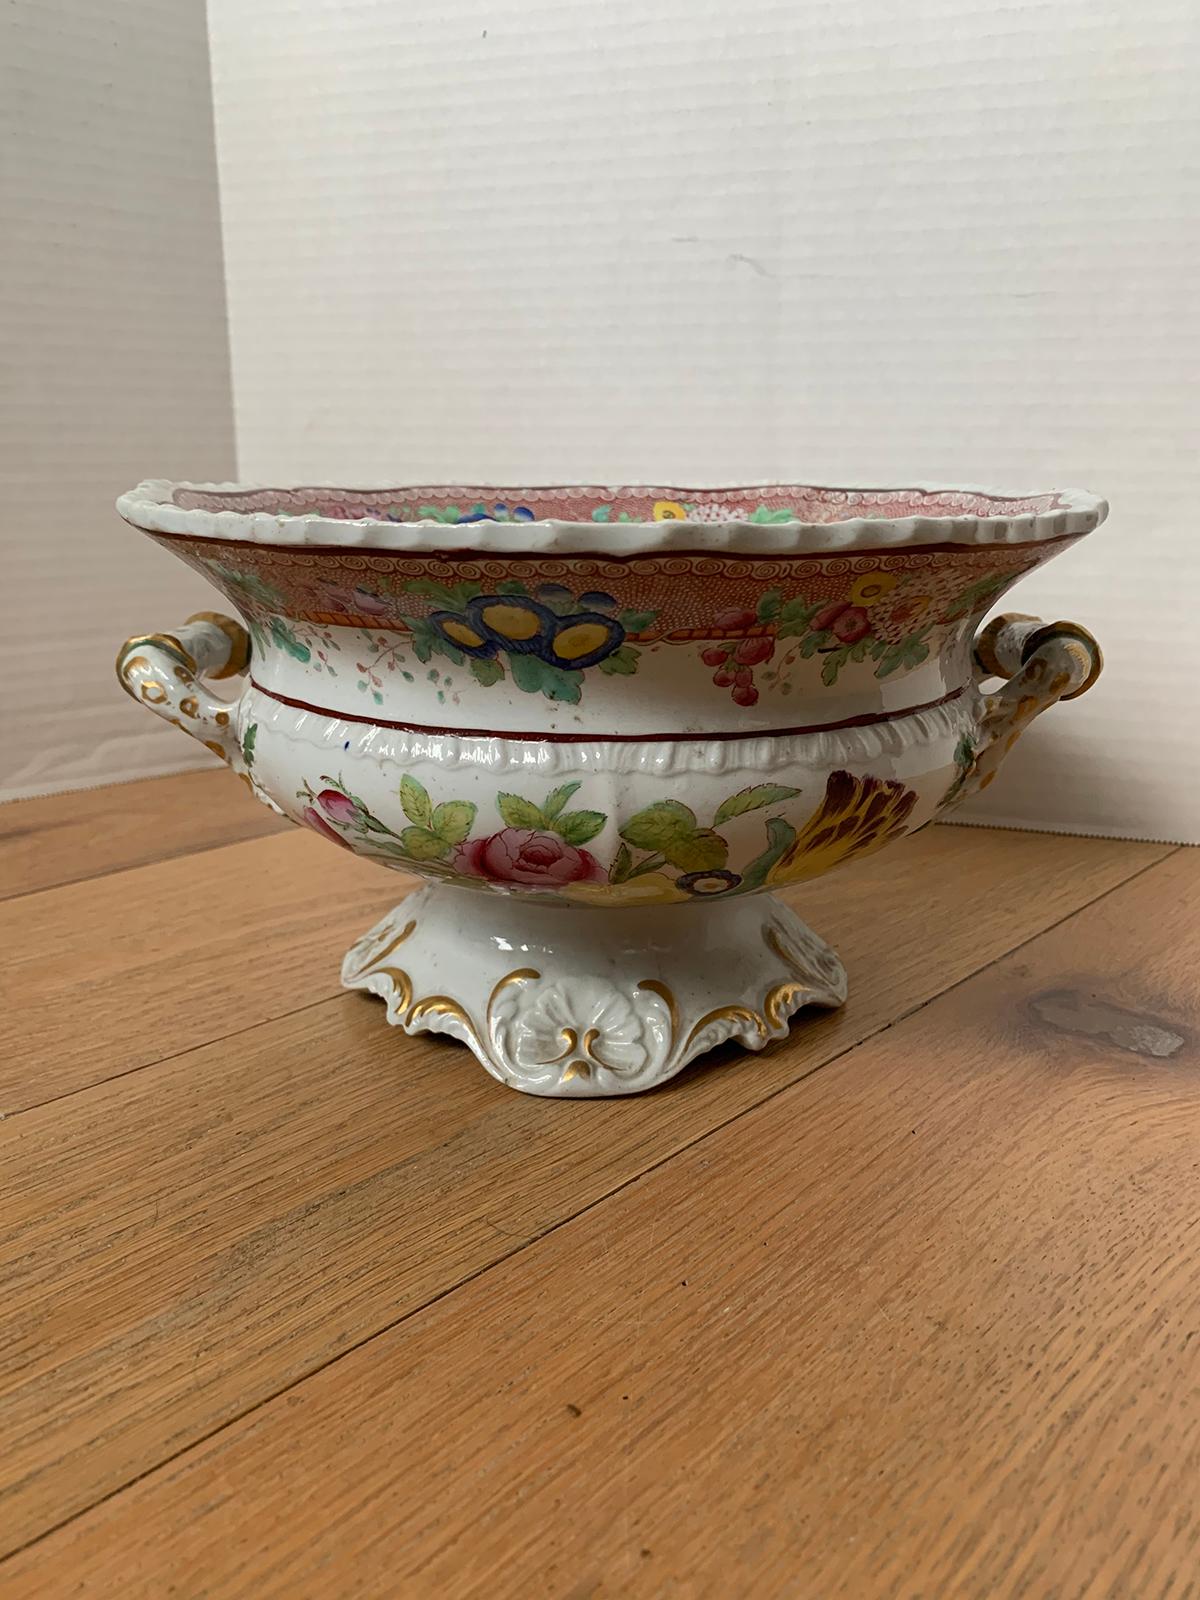 Early 19th century circa 1807-1822 English earthenware pottery compote by Hicks and Meigh with royal coat of arms mark.